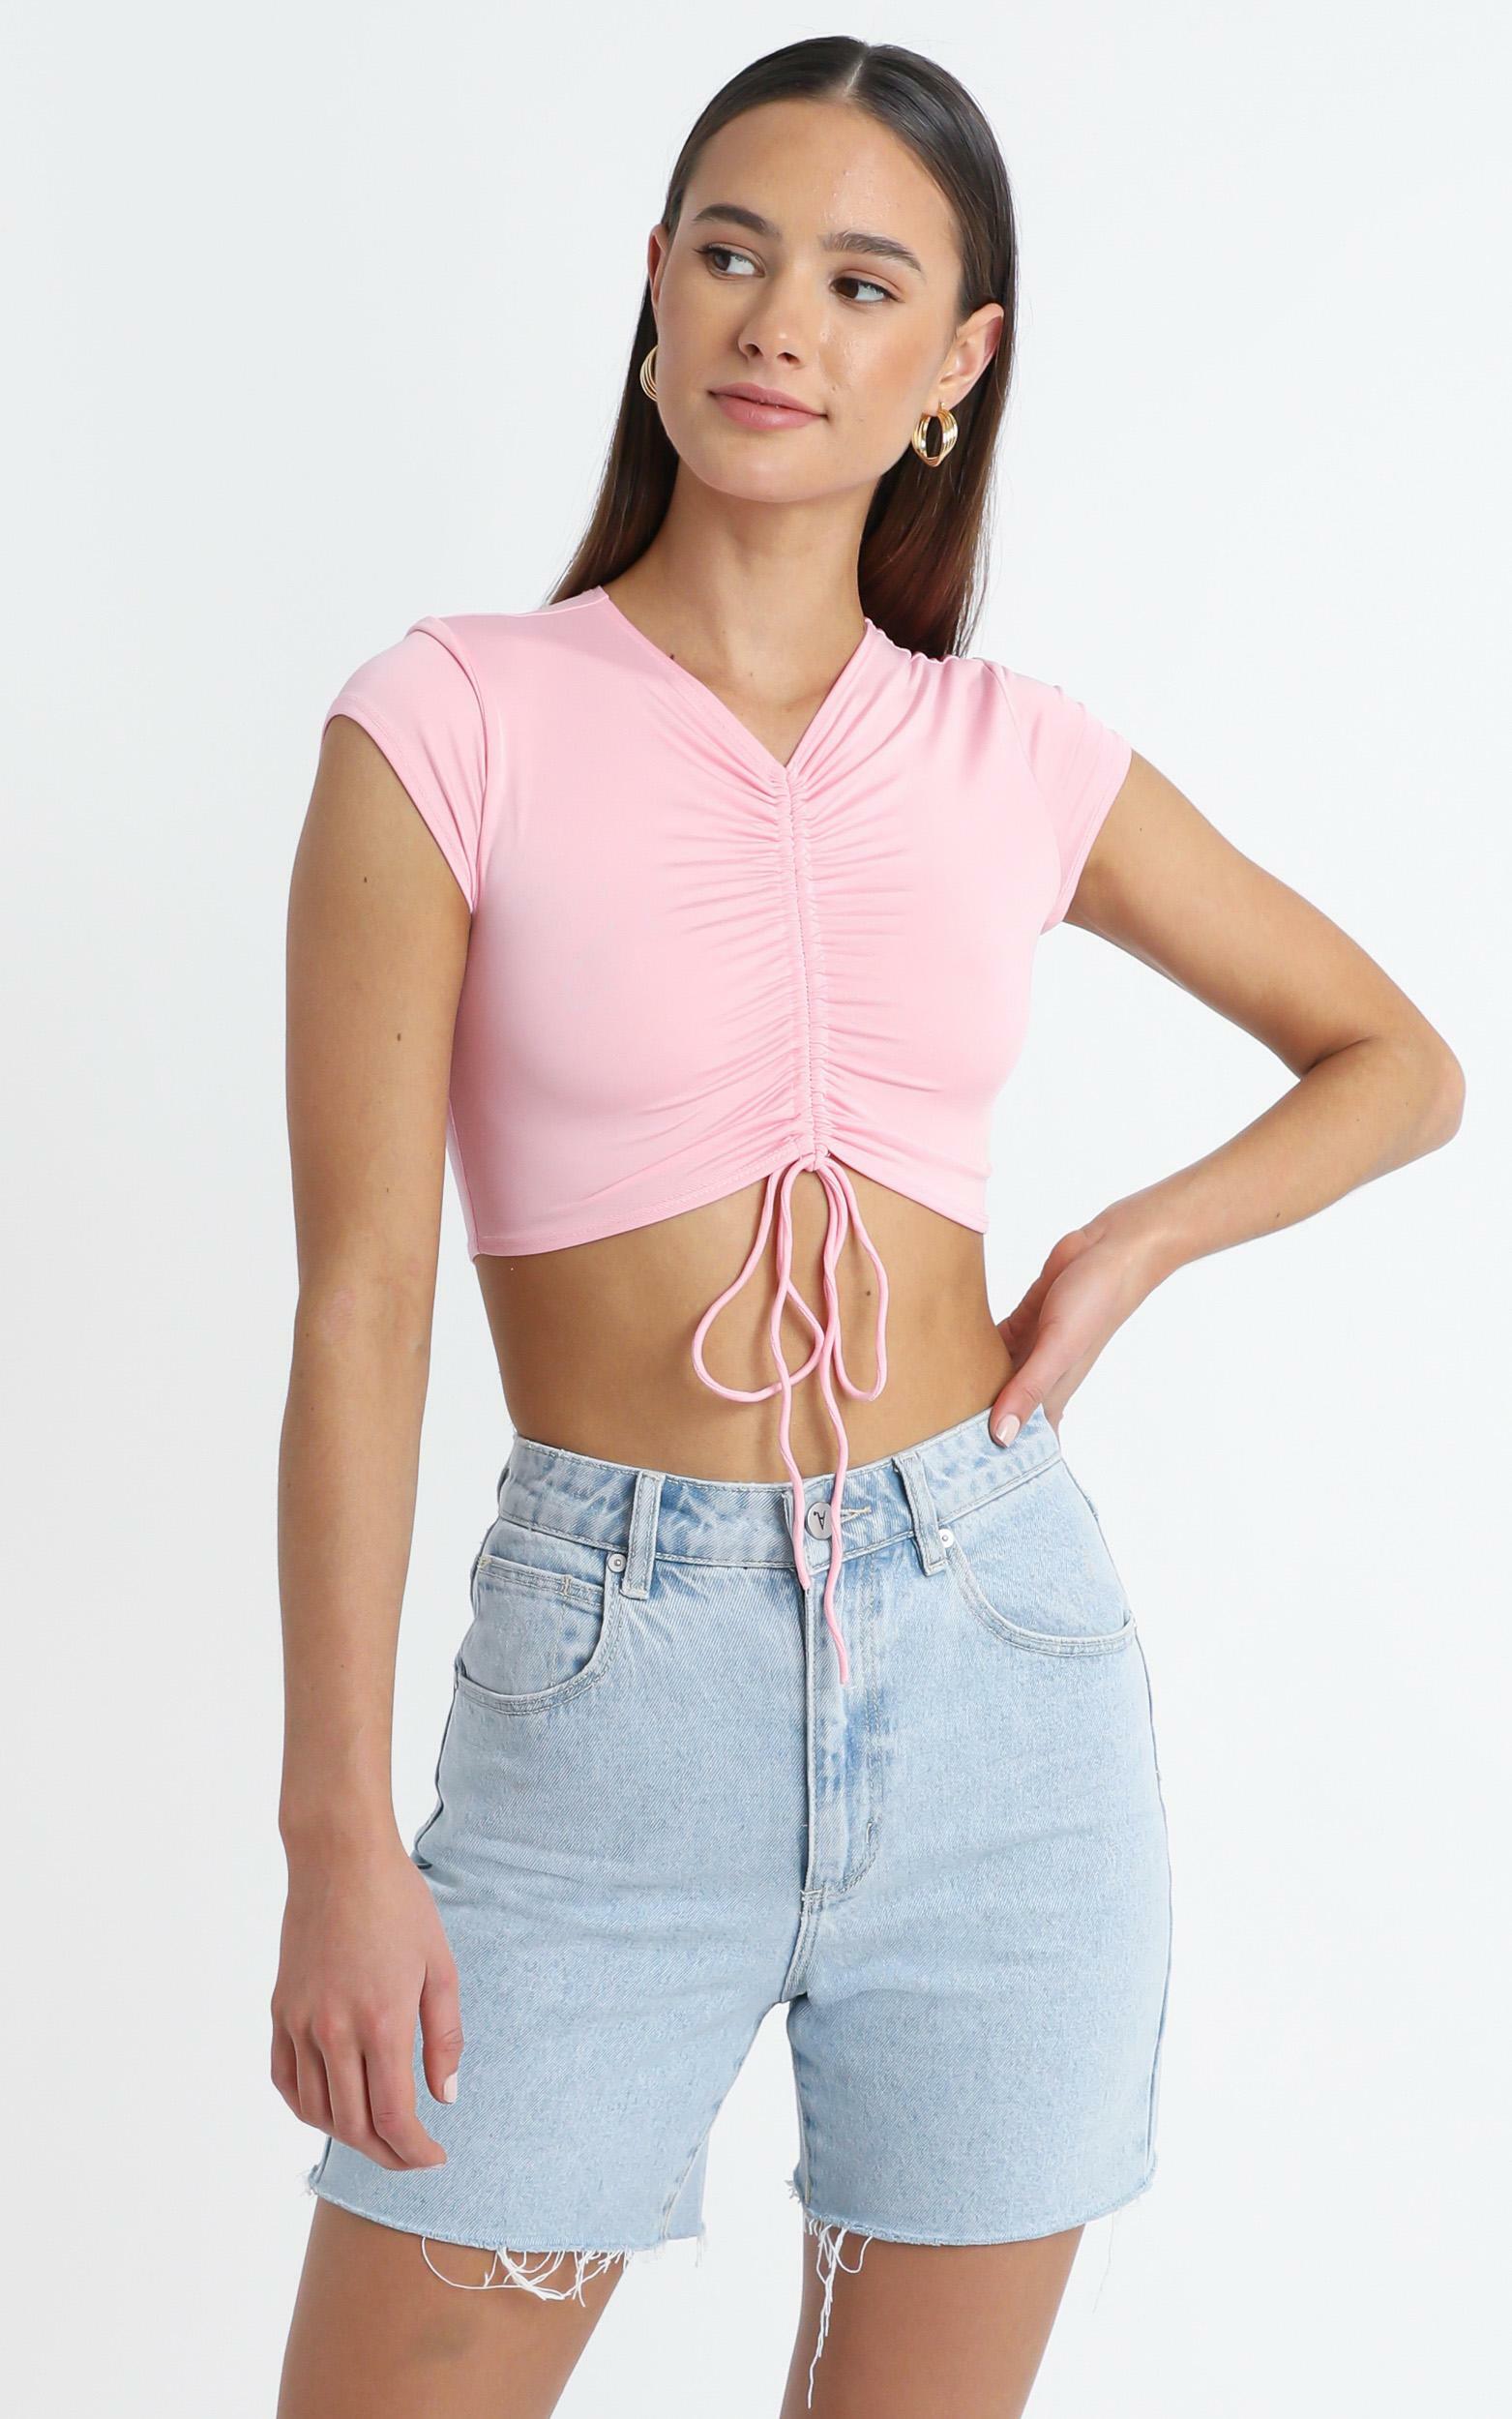 Adelaide Top in Pink - 8 (S), PNK1, hi-res image number null